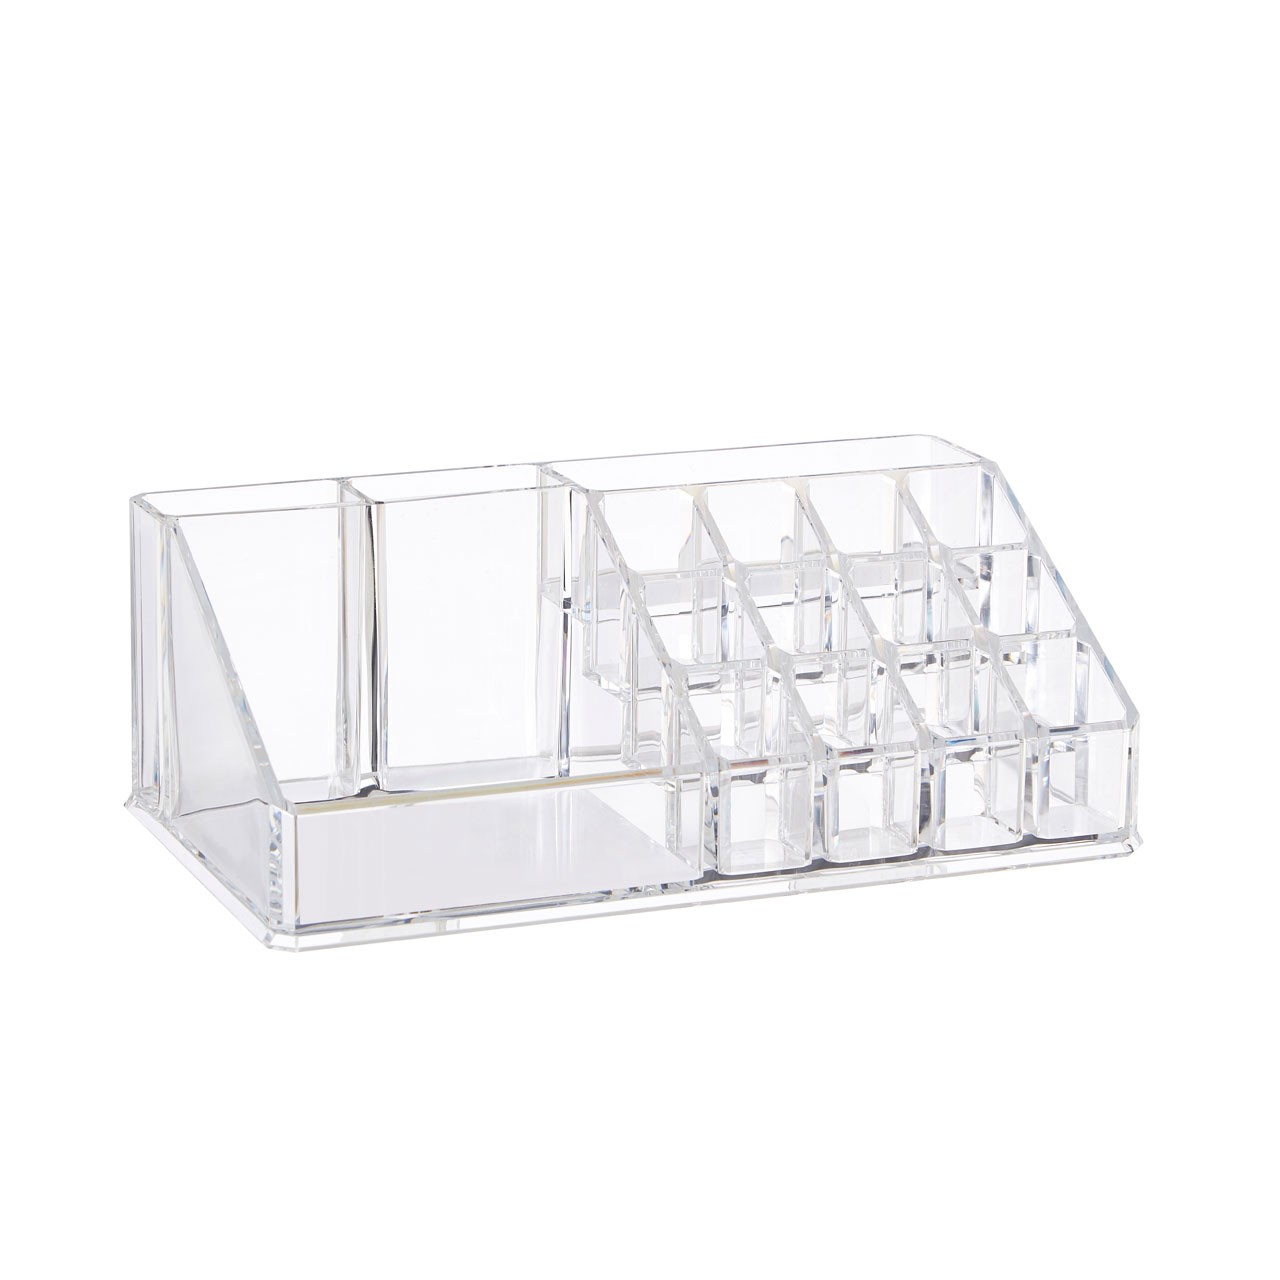 Prime Furnishing 16 Compartment Cosmetics Organiser - Clear